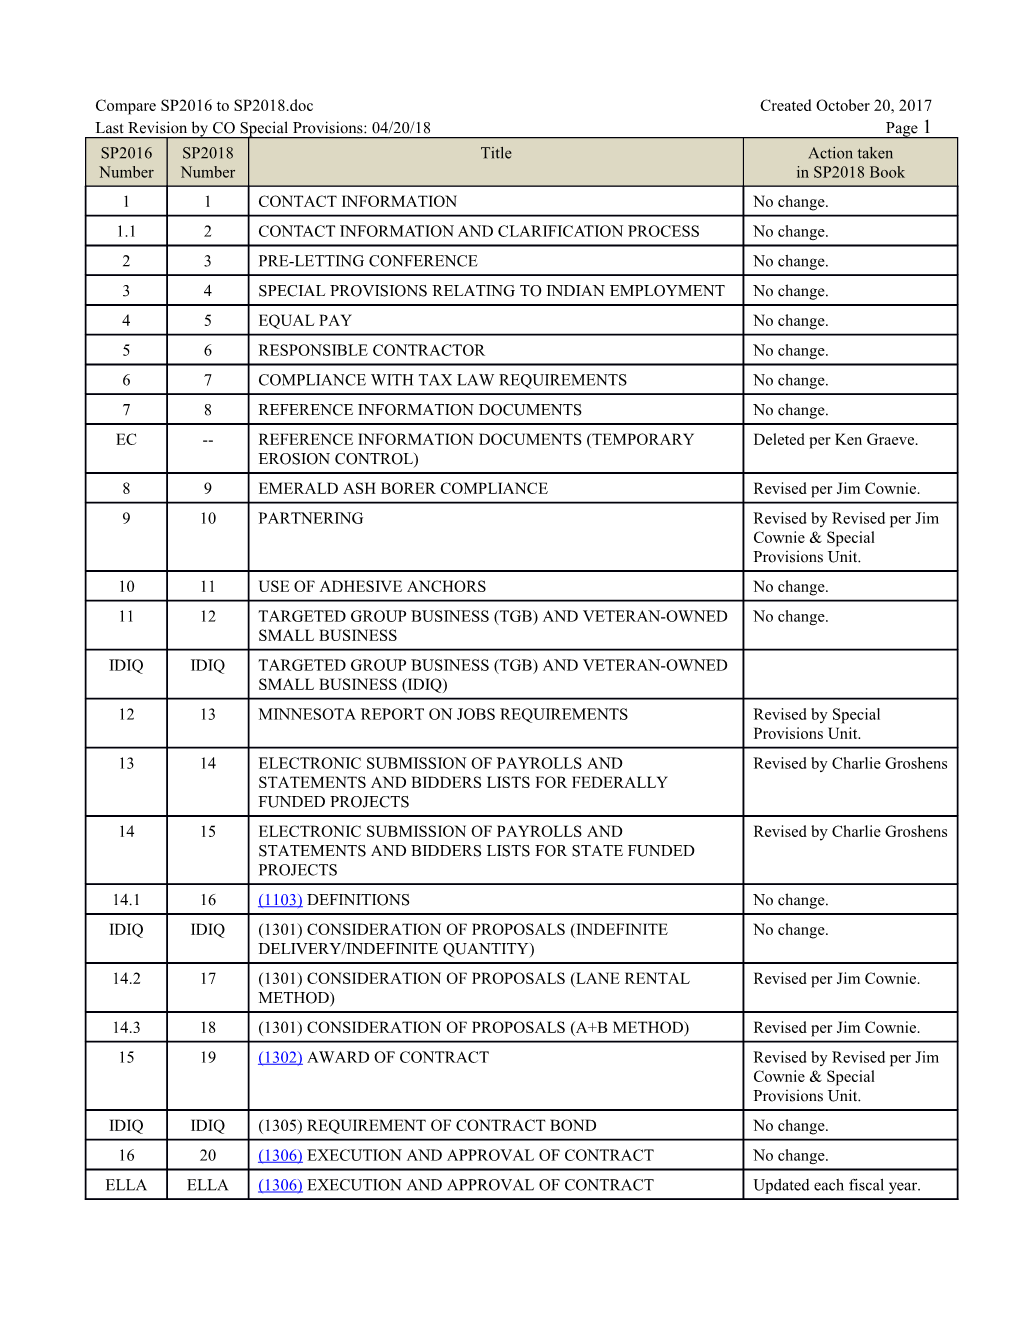 Last Revision by CO Special Provisions: 04/20/18Page 1